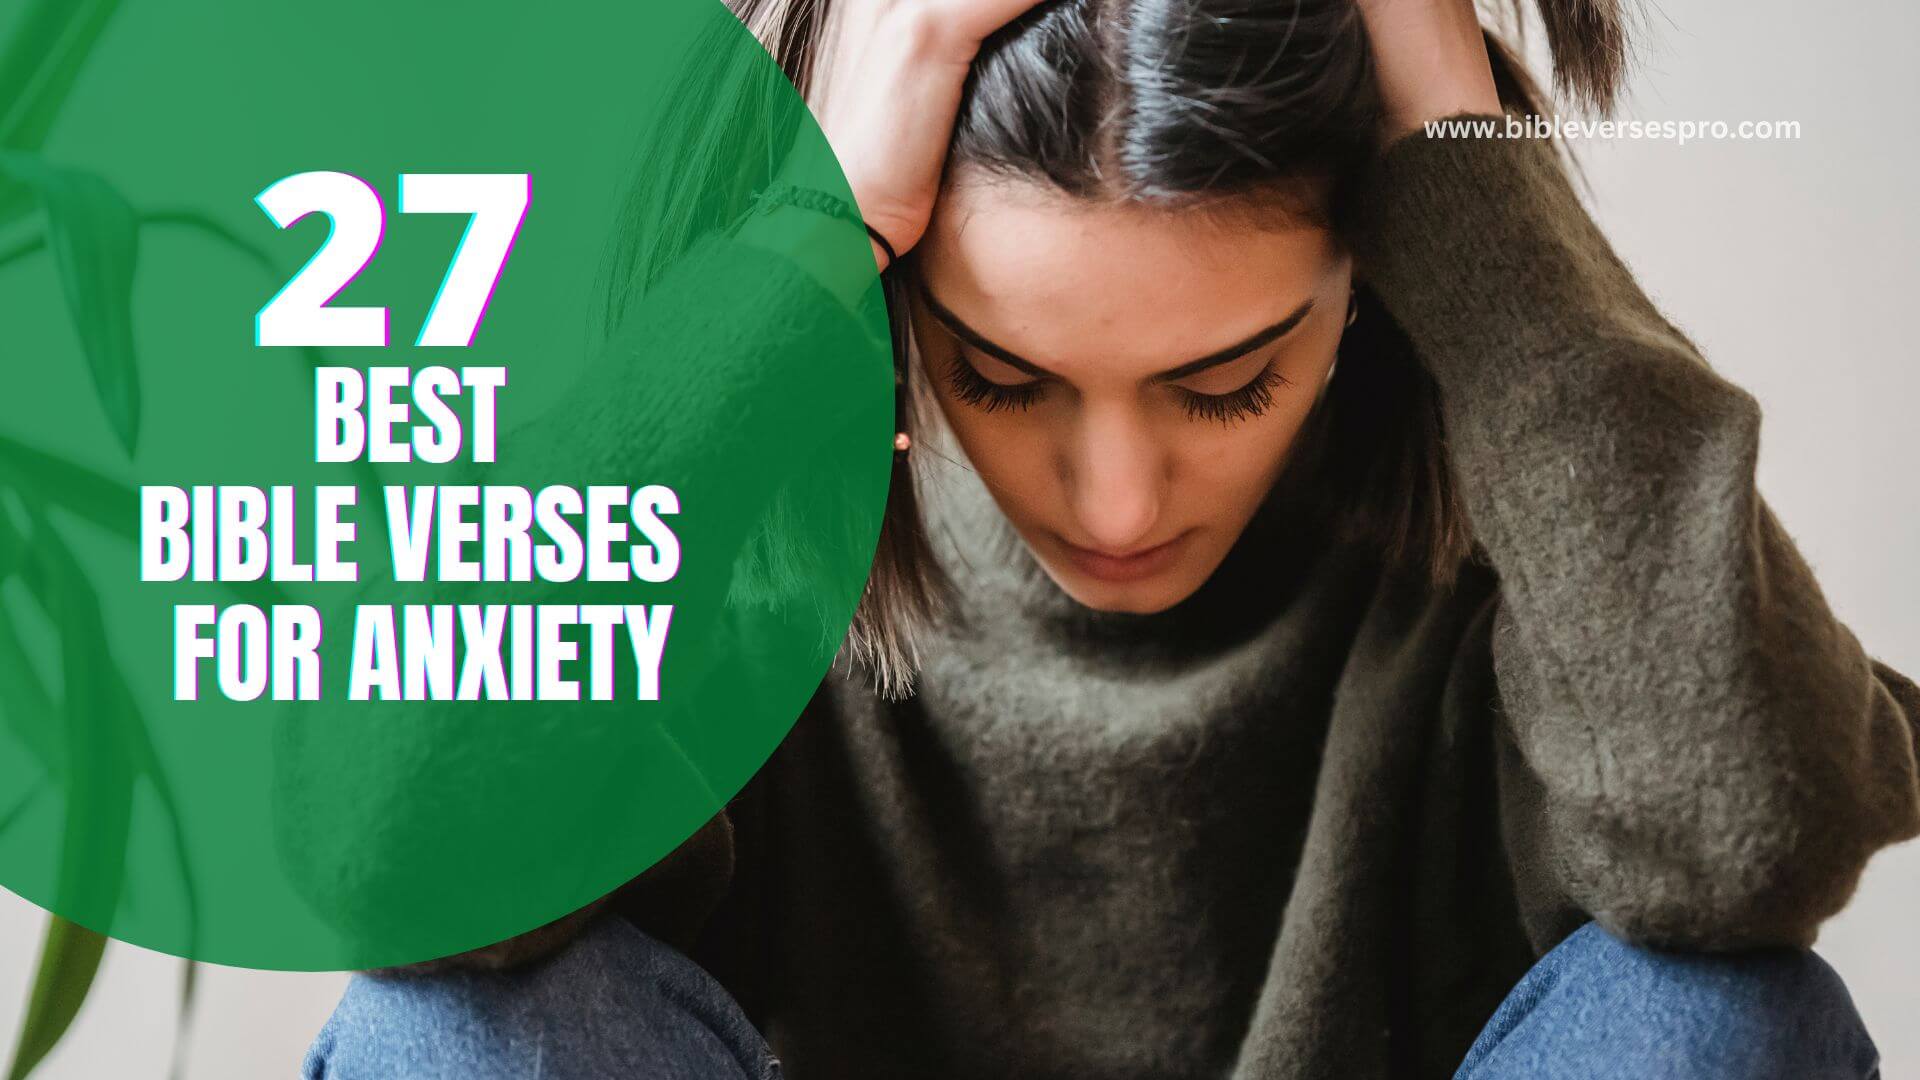 BEST BIBLE VERSES FOR ANXIETY